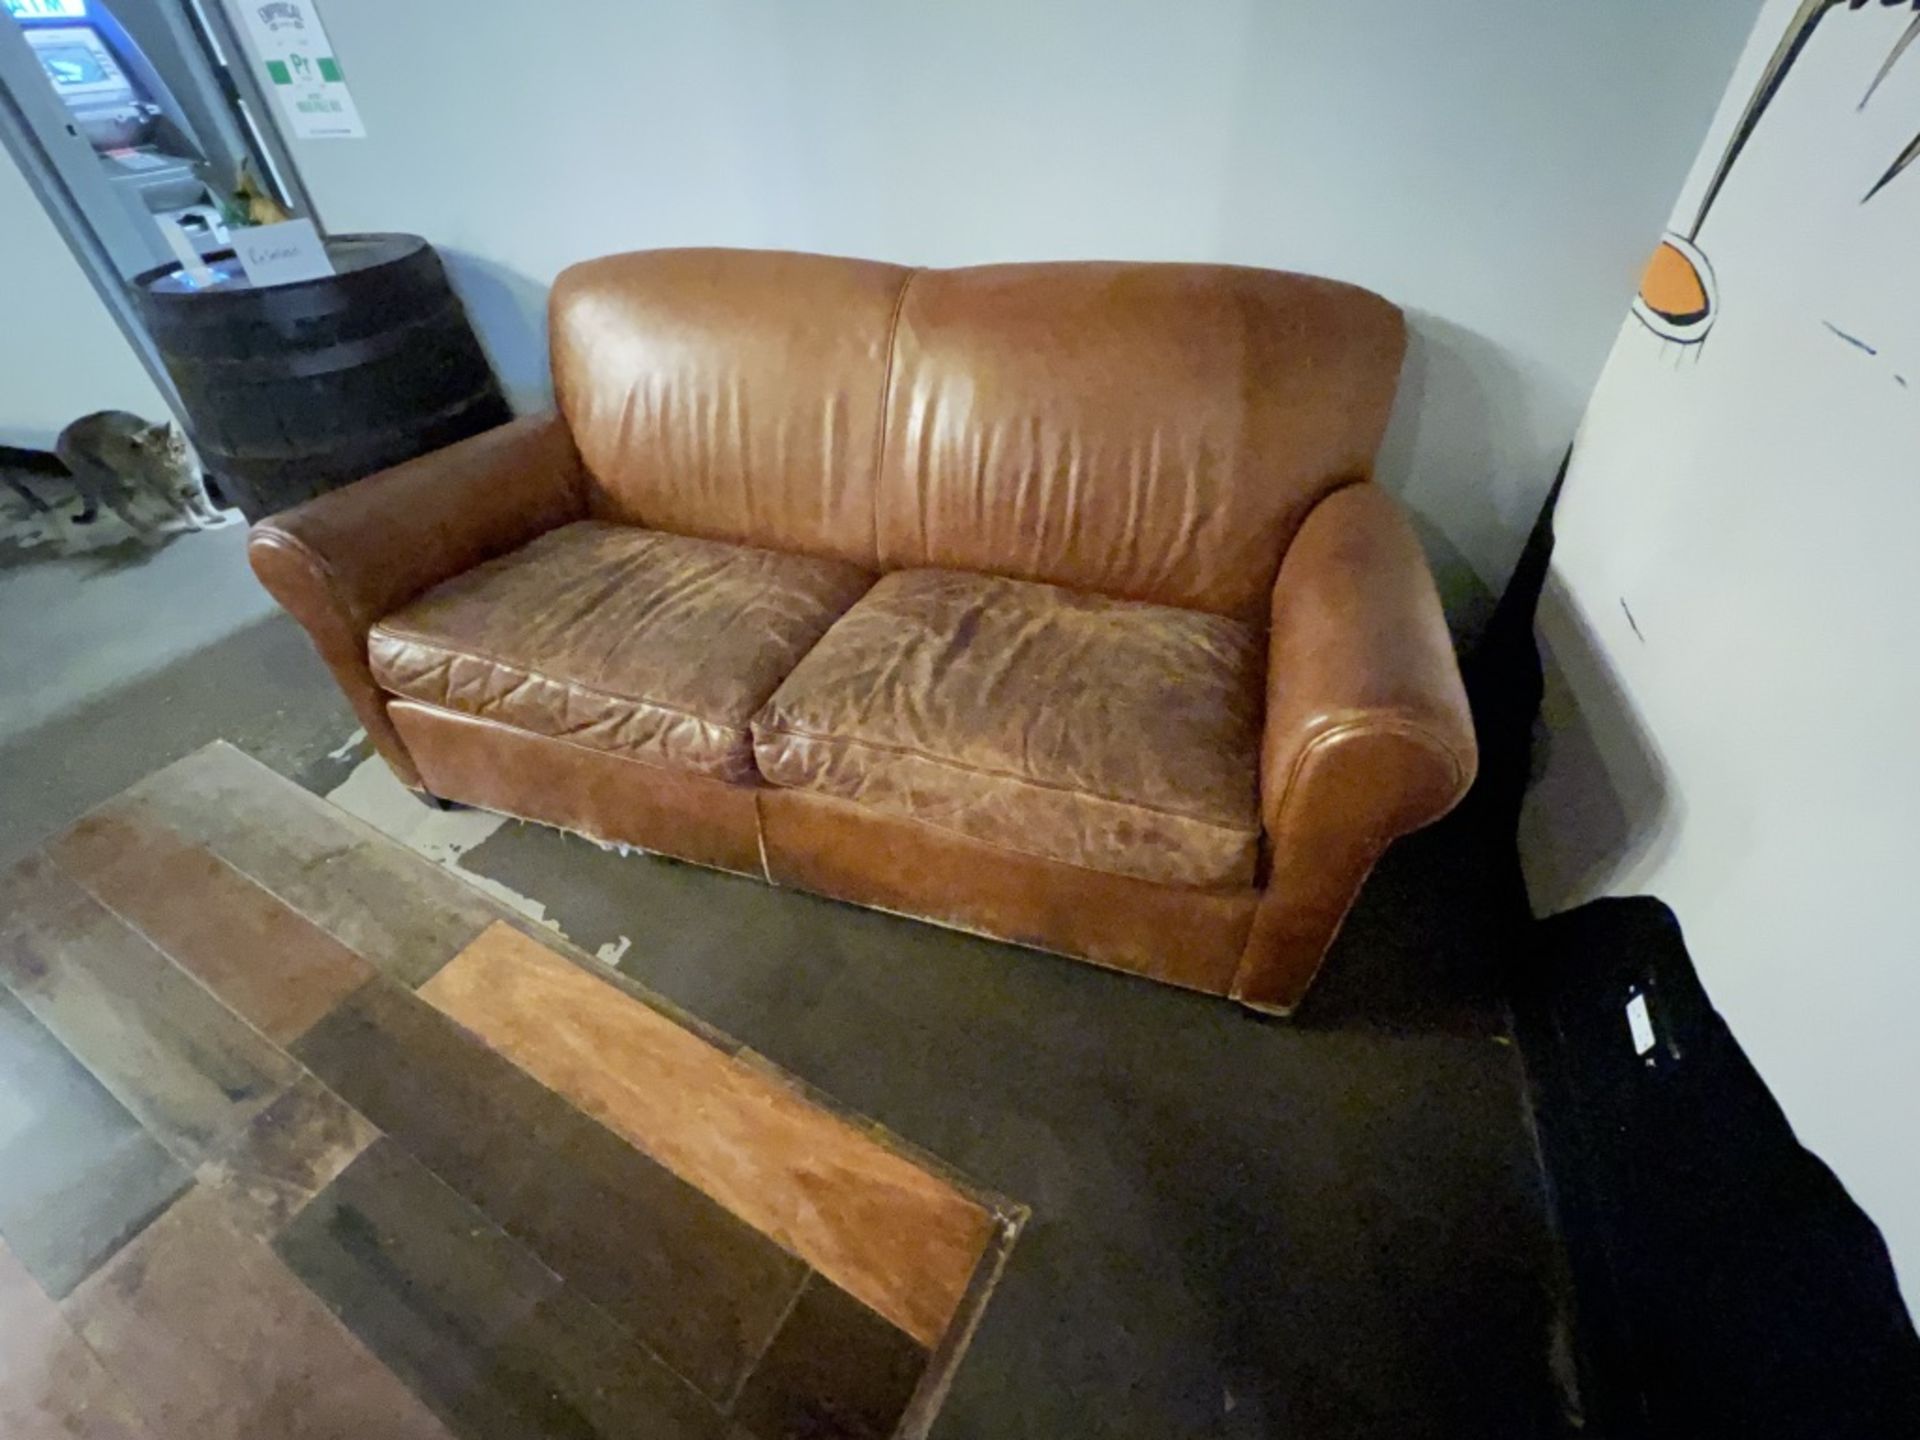 PADDED COUCH APPROX. 76" LONG